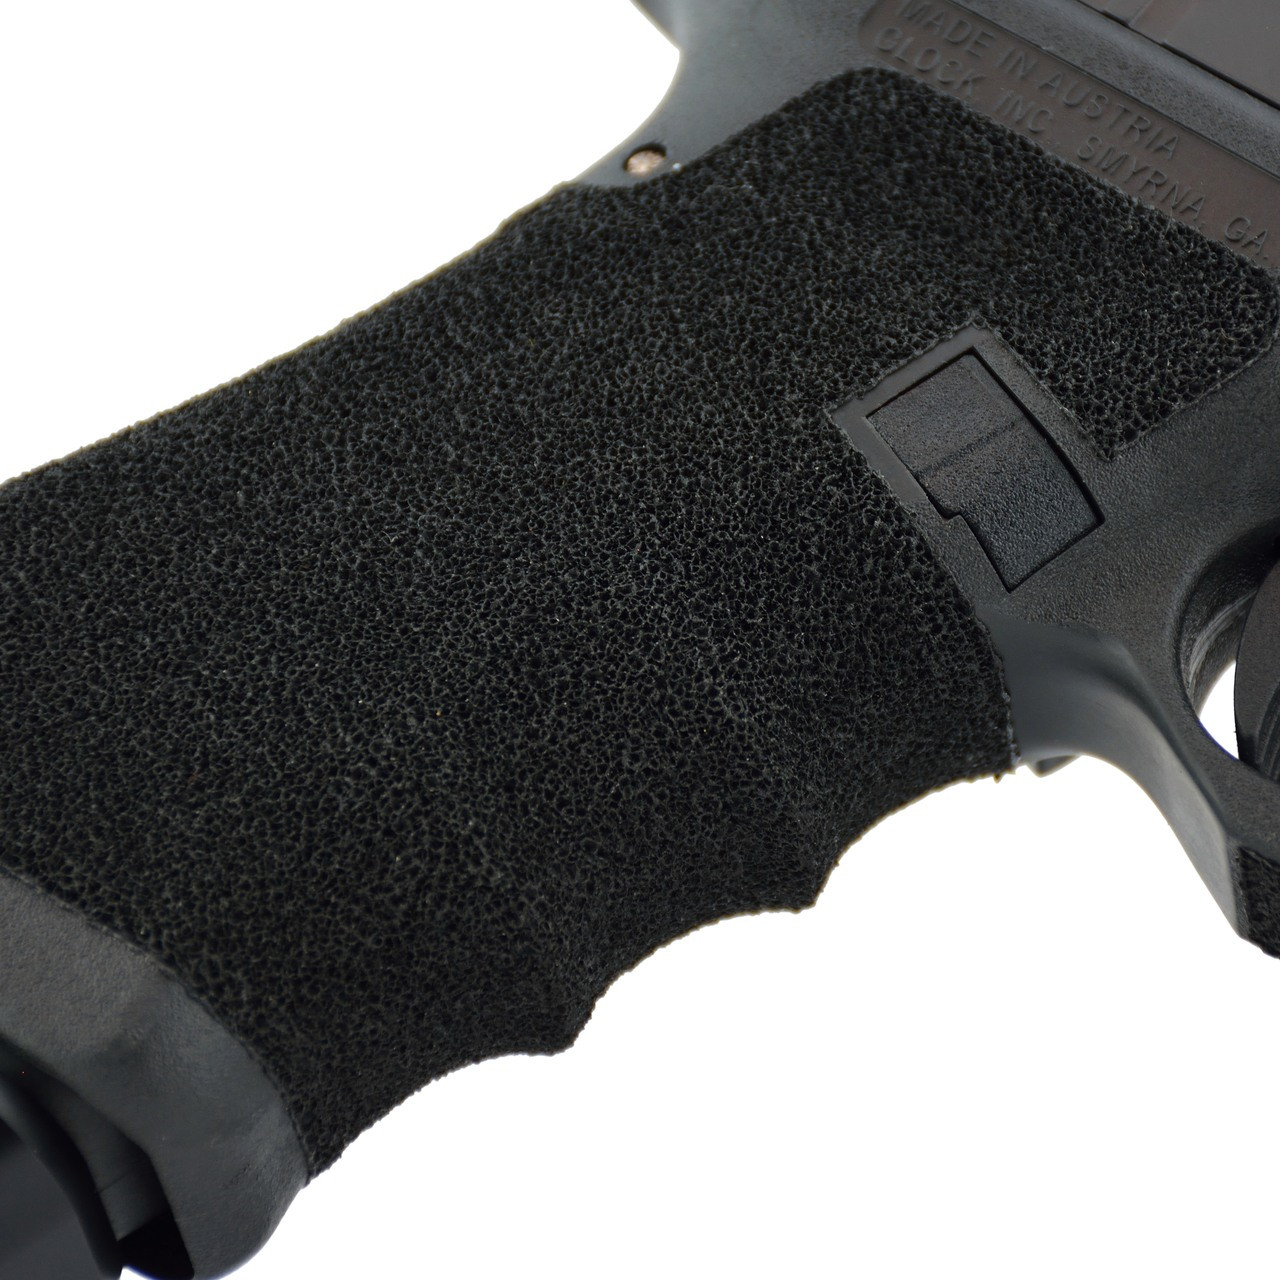 Glock Stippling - How many kinds are there? - 5D Tactical